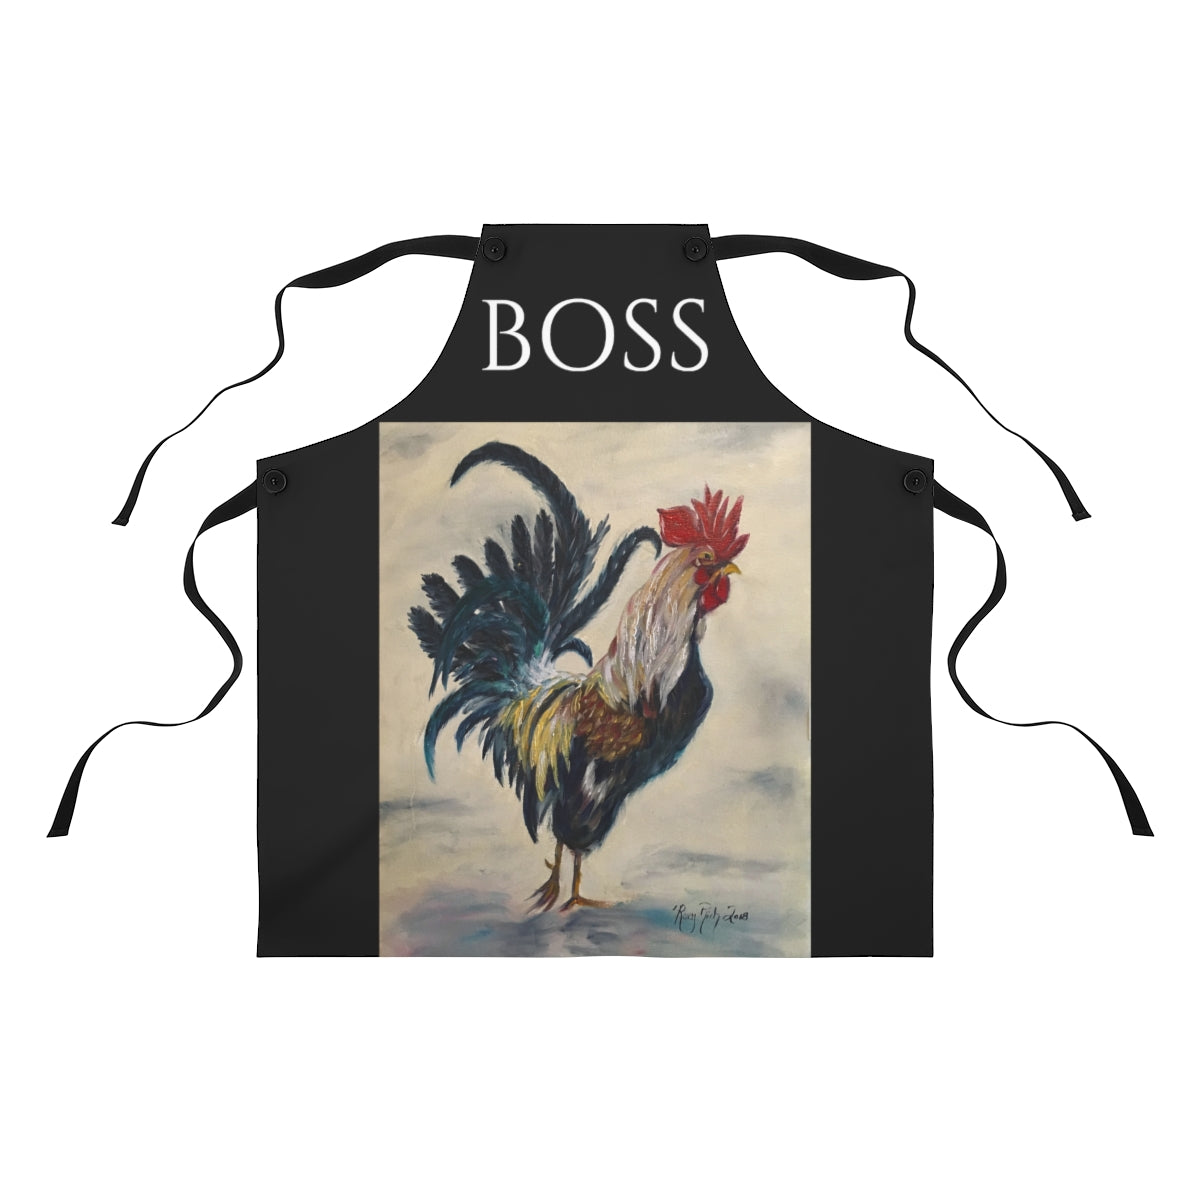 Orignal Rooster Painting printed on a Black Apron Kitchen Cooking accessory with Original Art